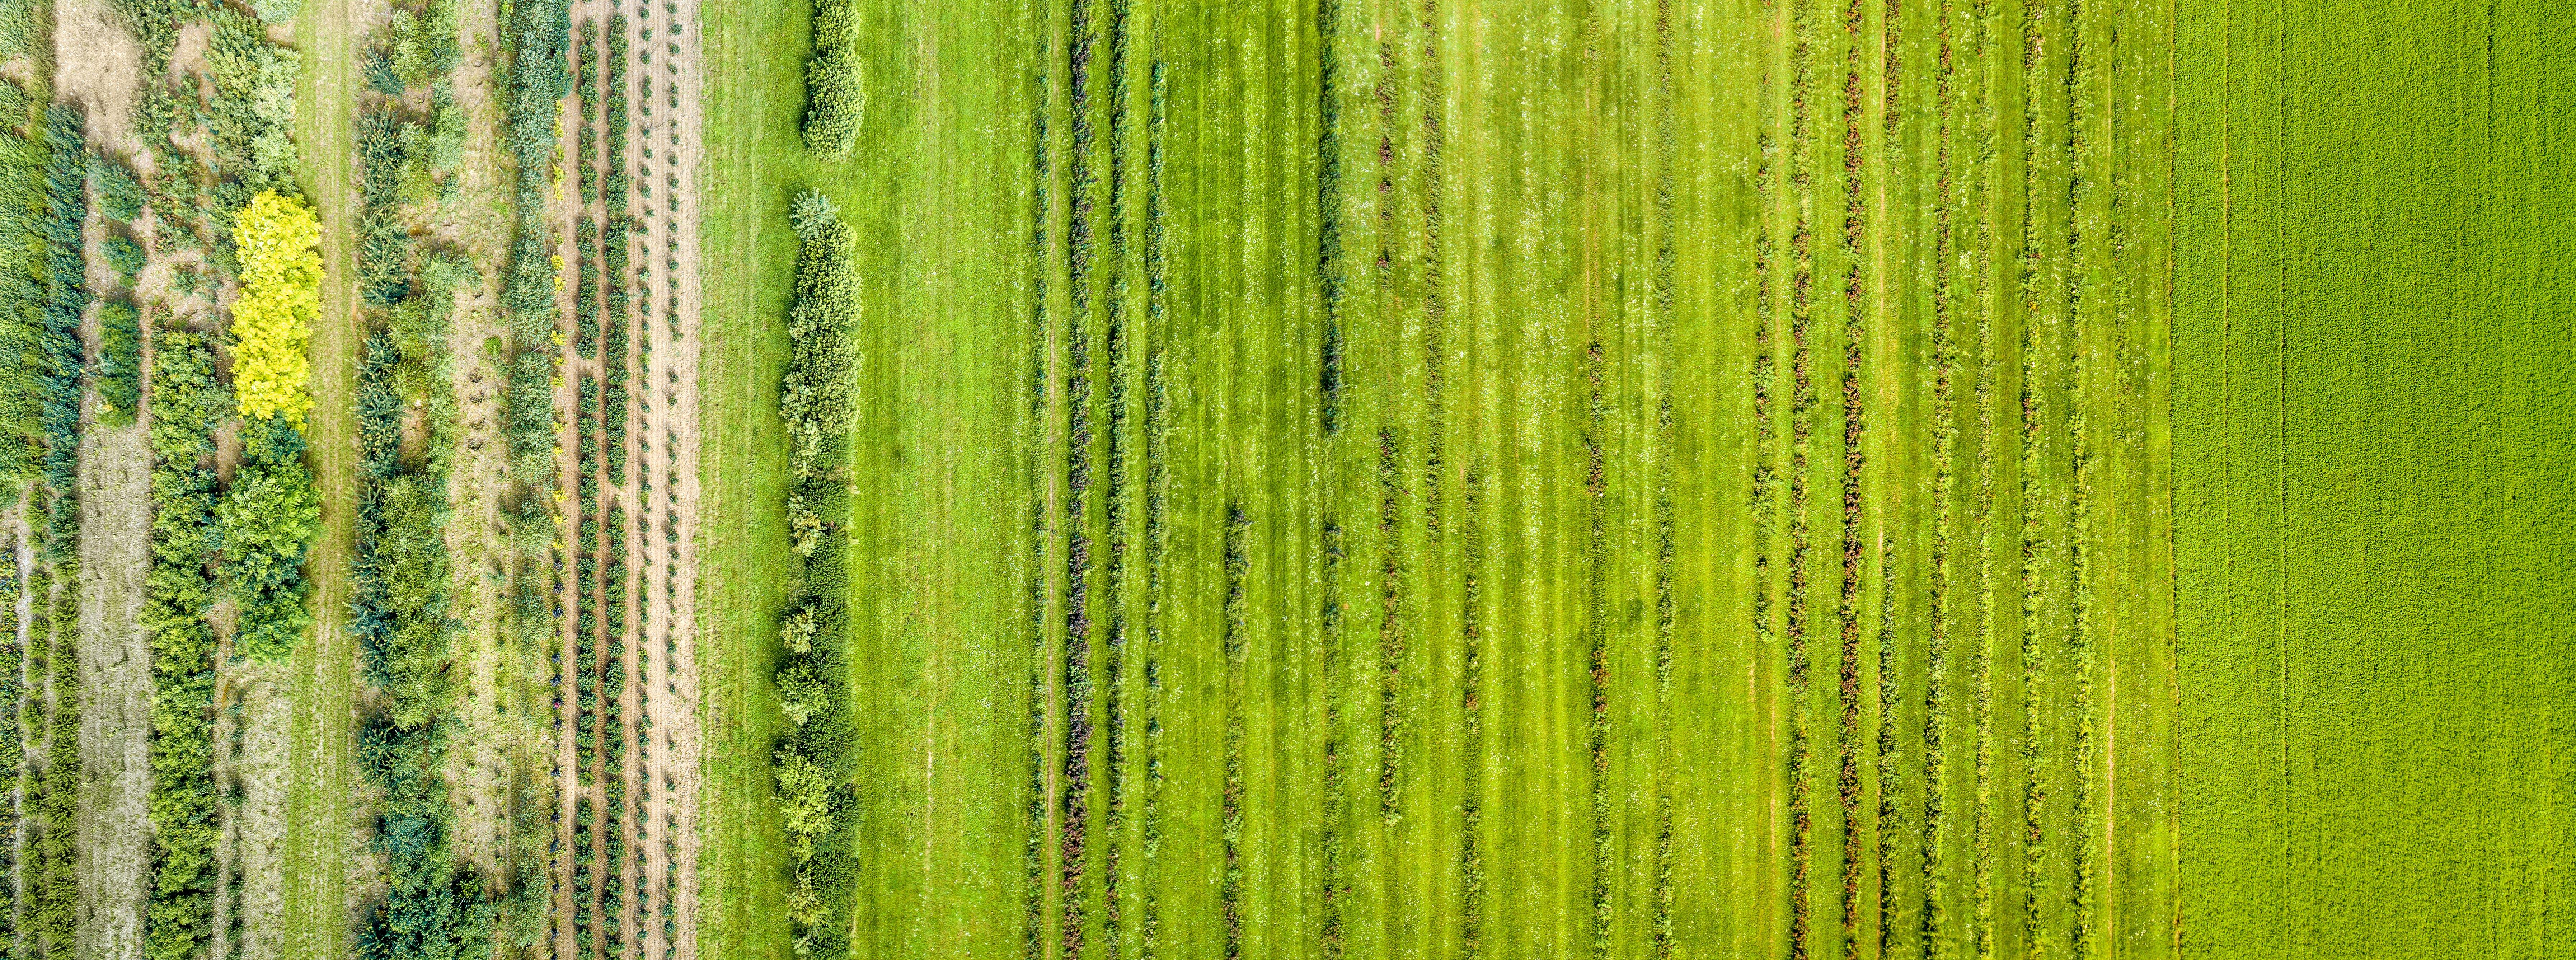 © Adobe stock: Crops from above